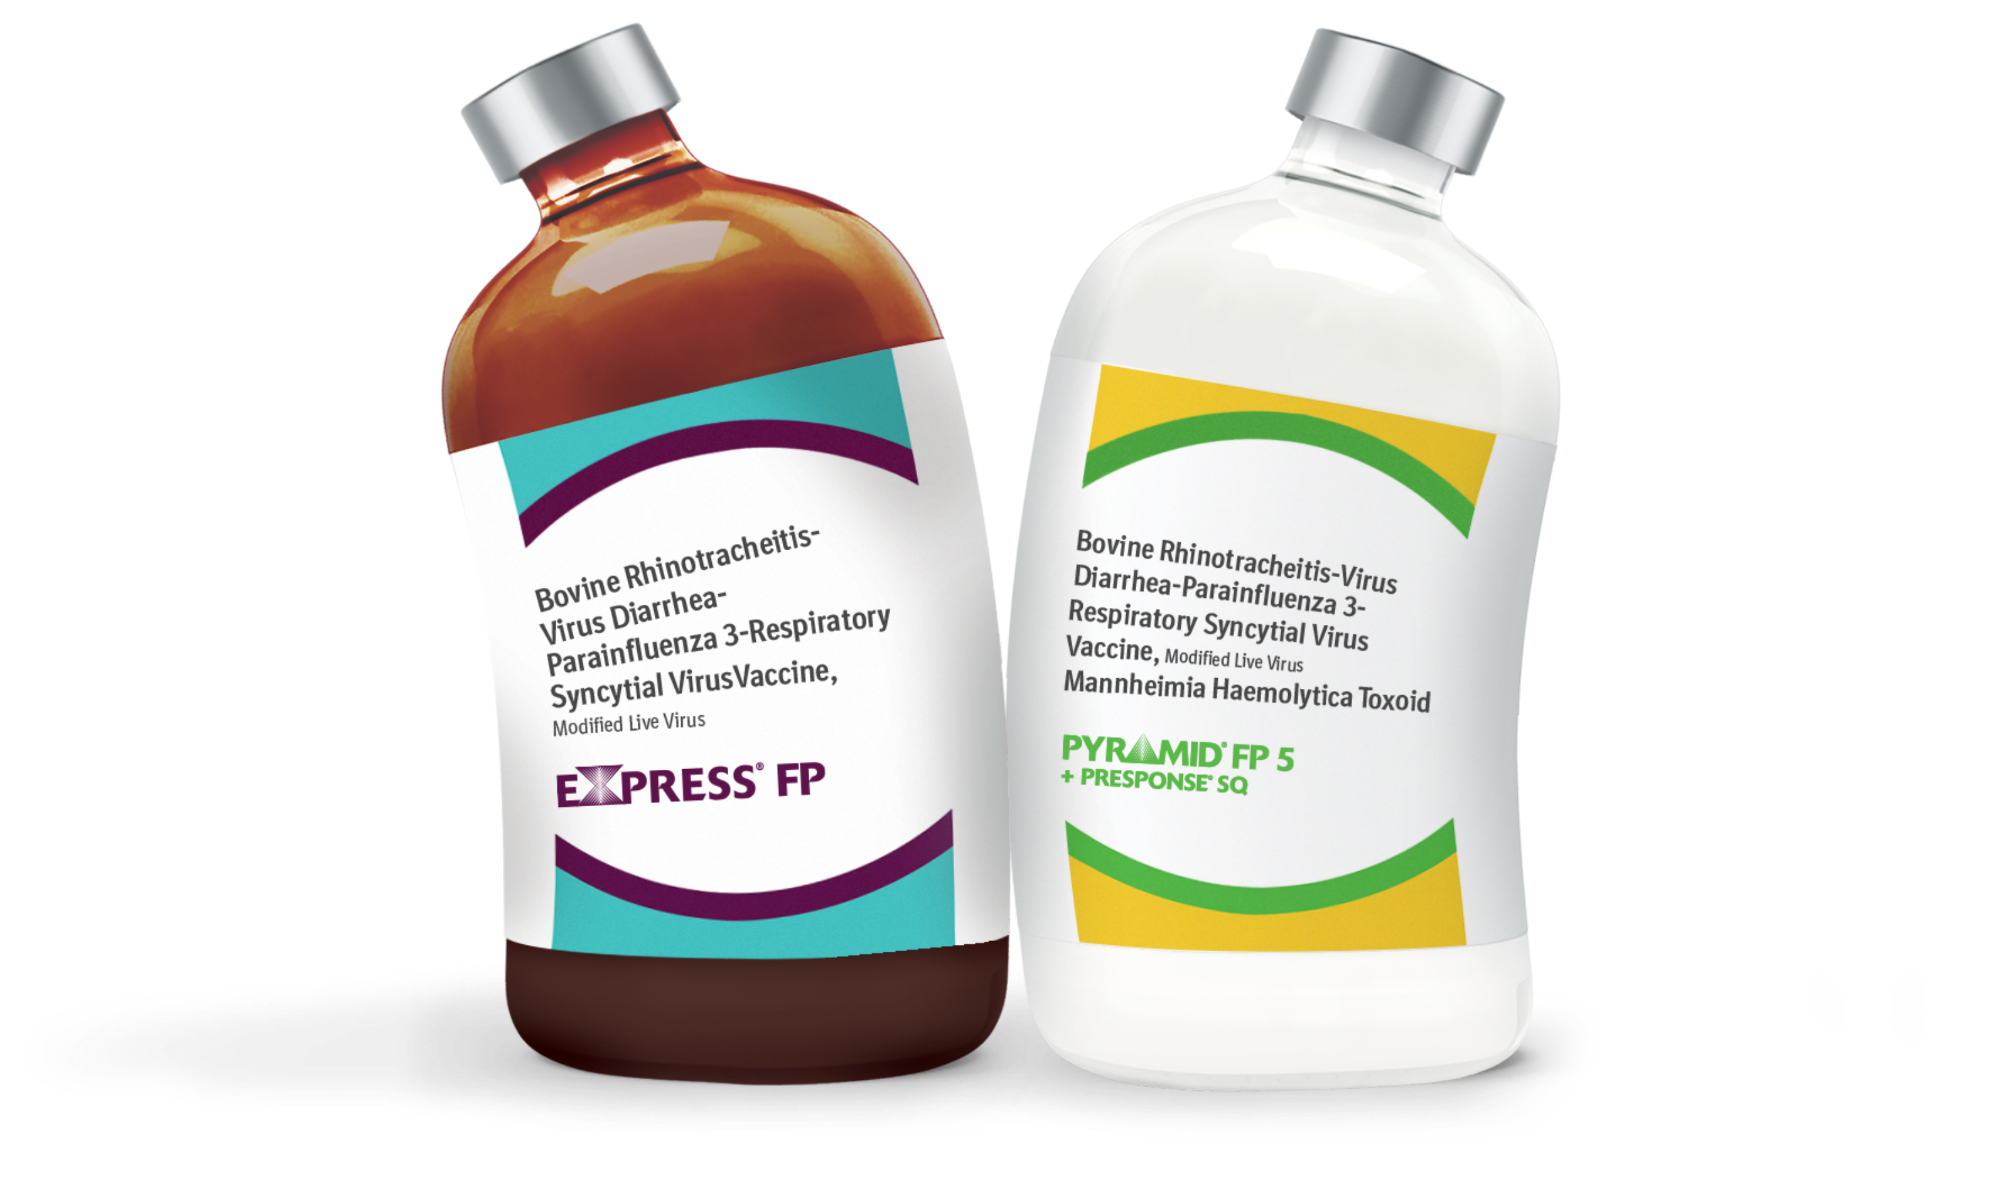 express fp and pyramid fp five bottle